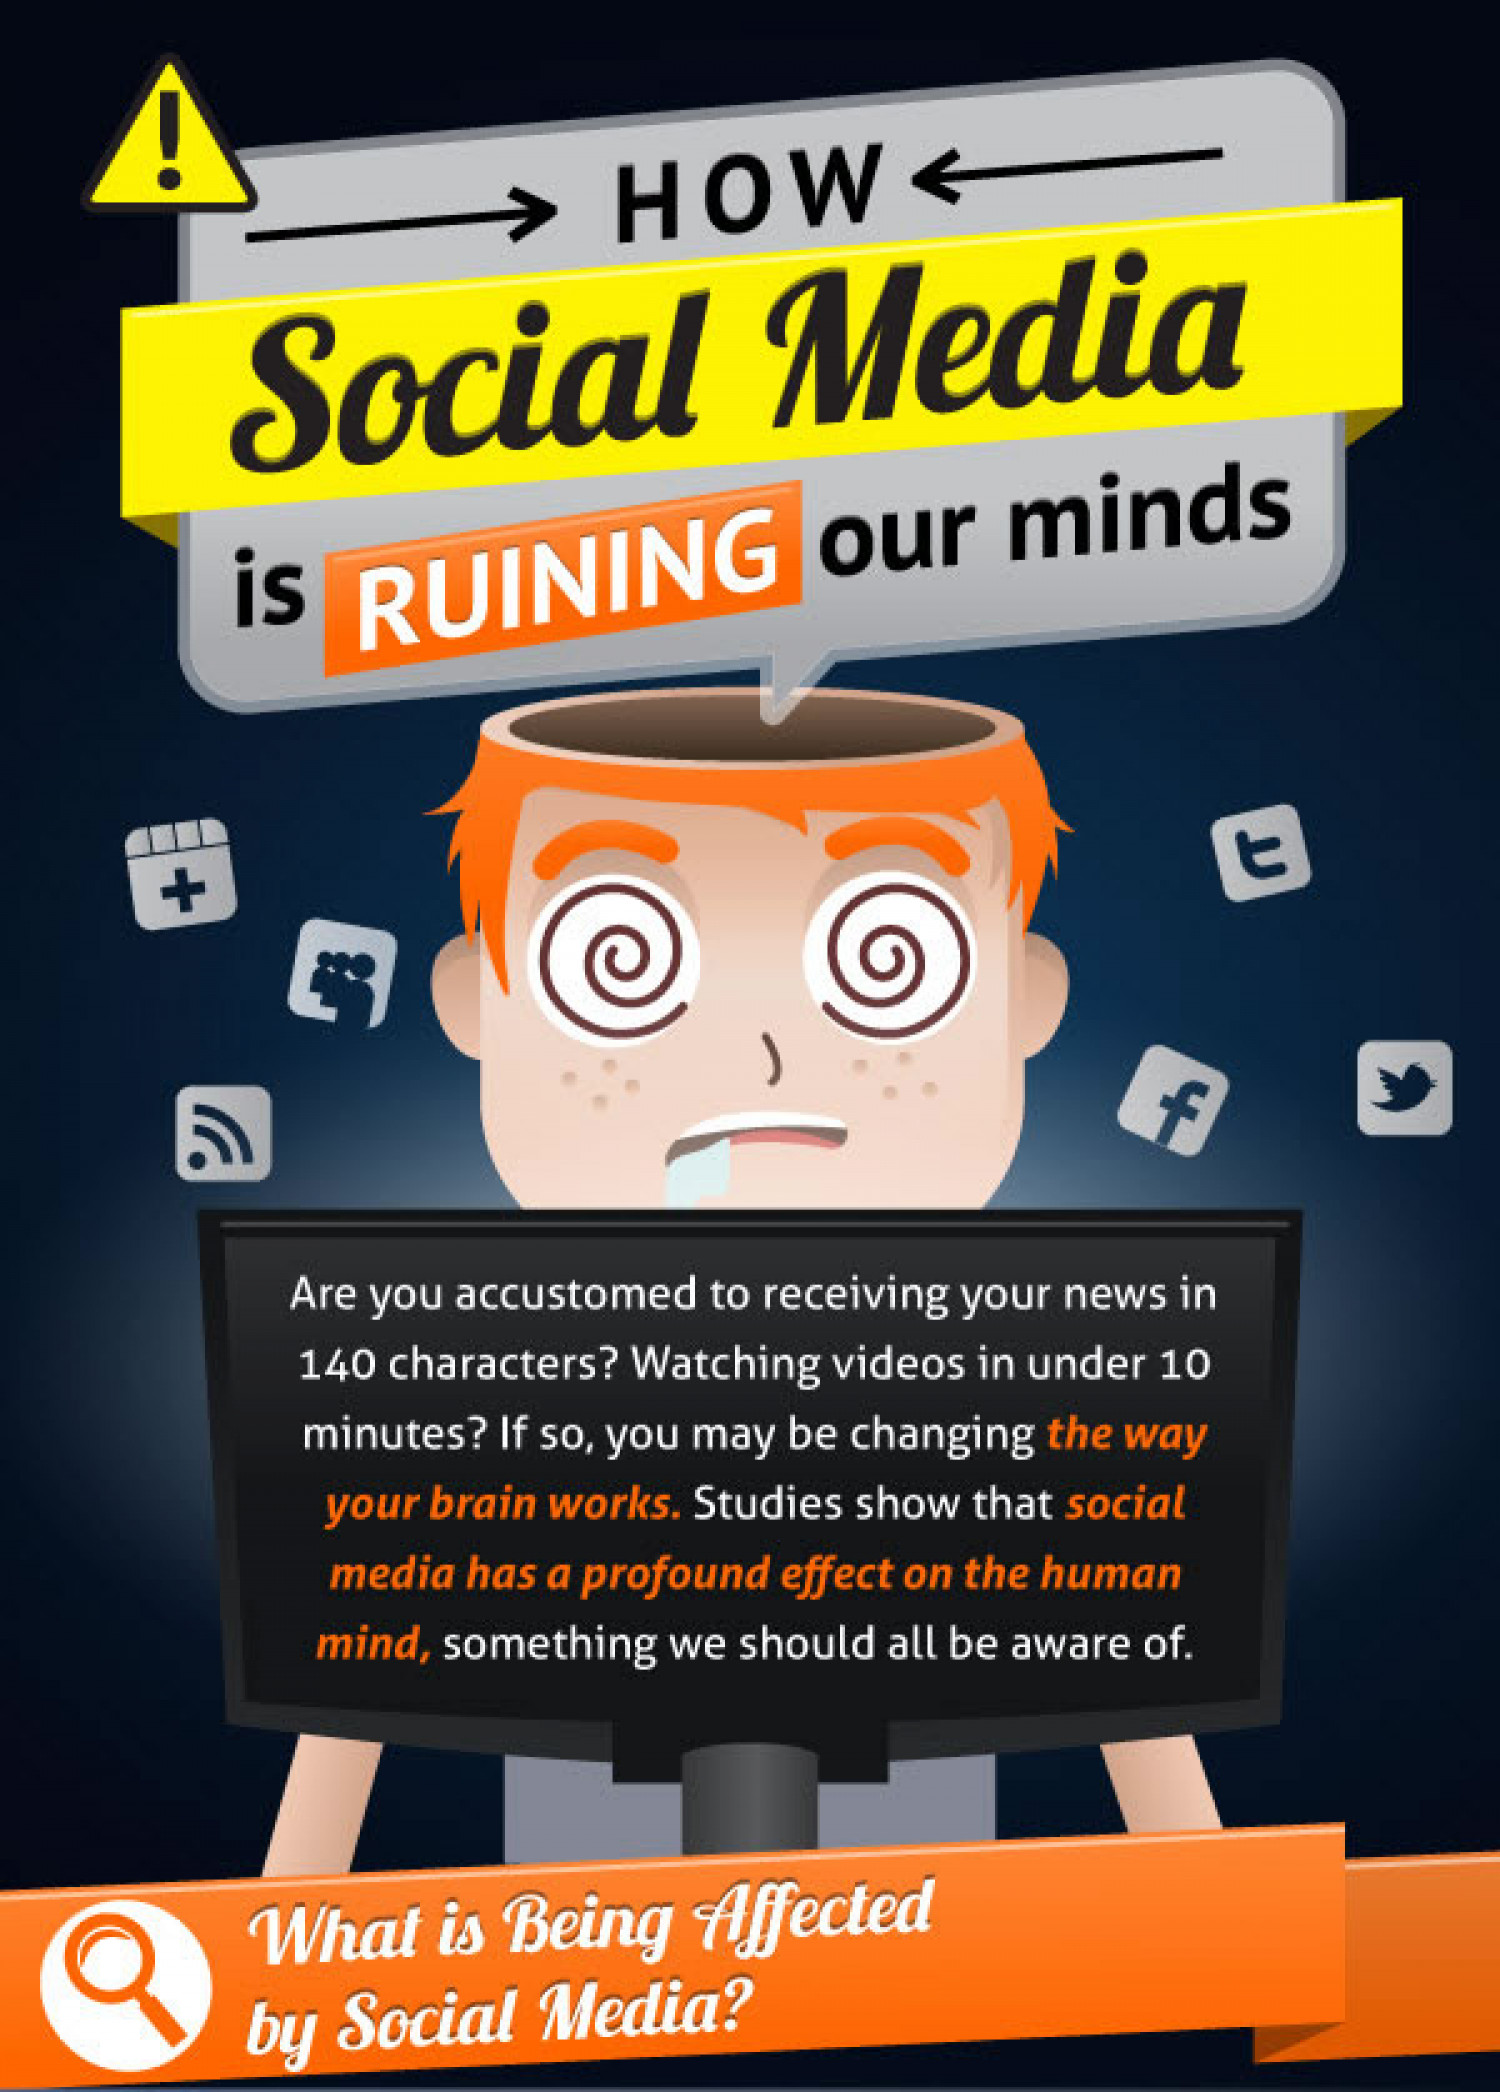 How Social Media is Ruining our Minds Infographic